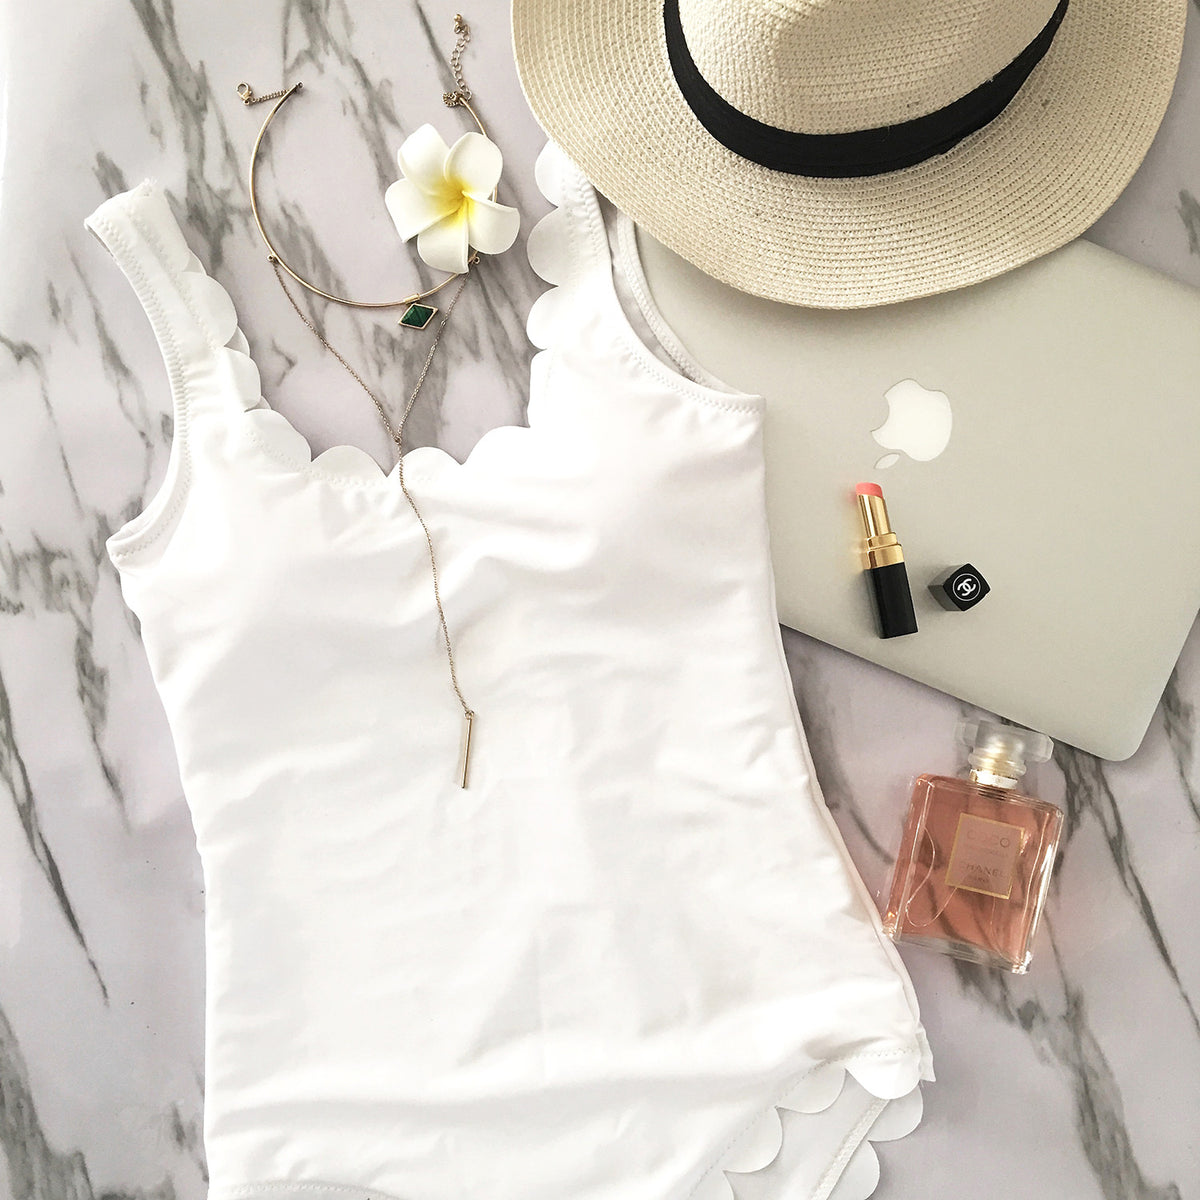 Cute Scallop One Piece Swimsuit- White - worthtryit.com